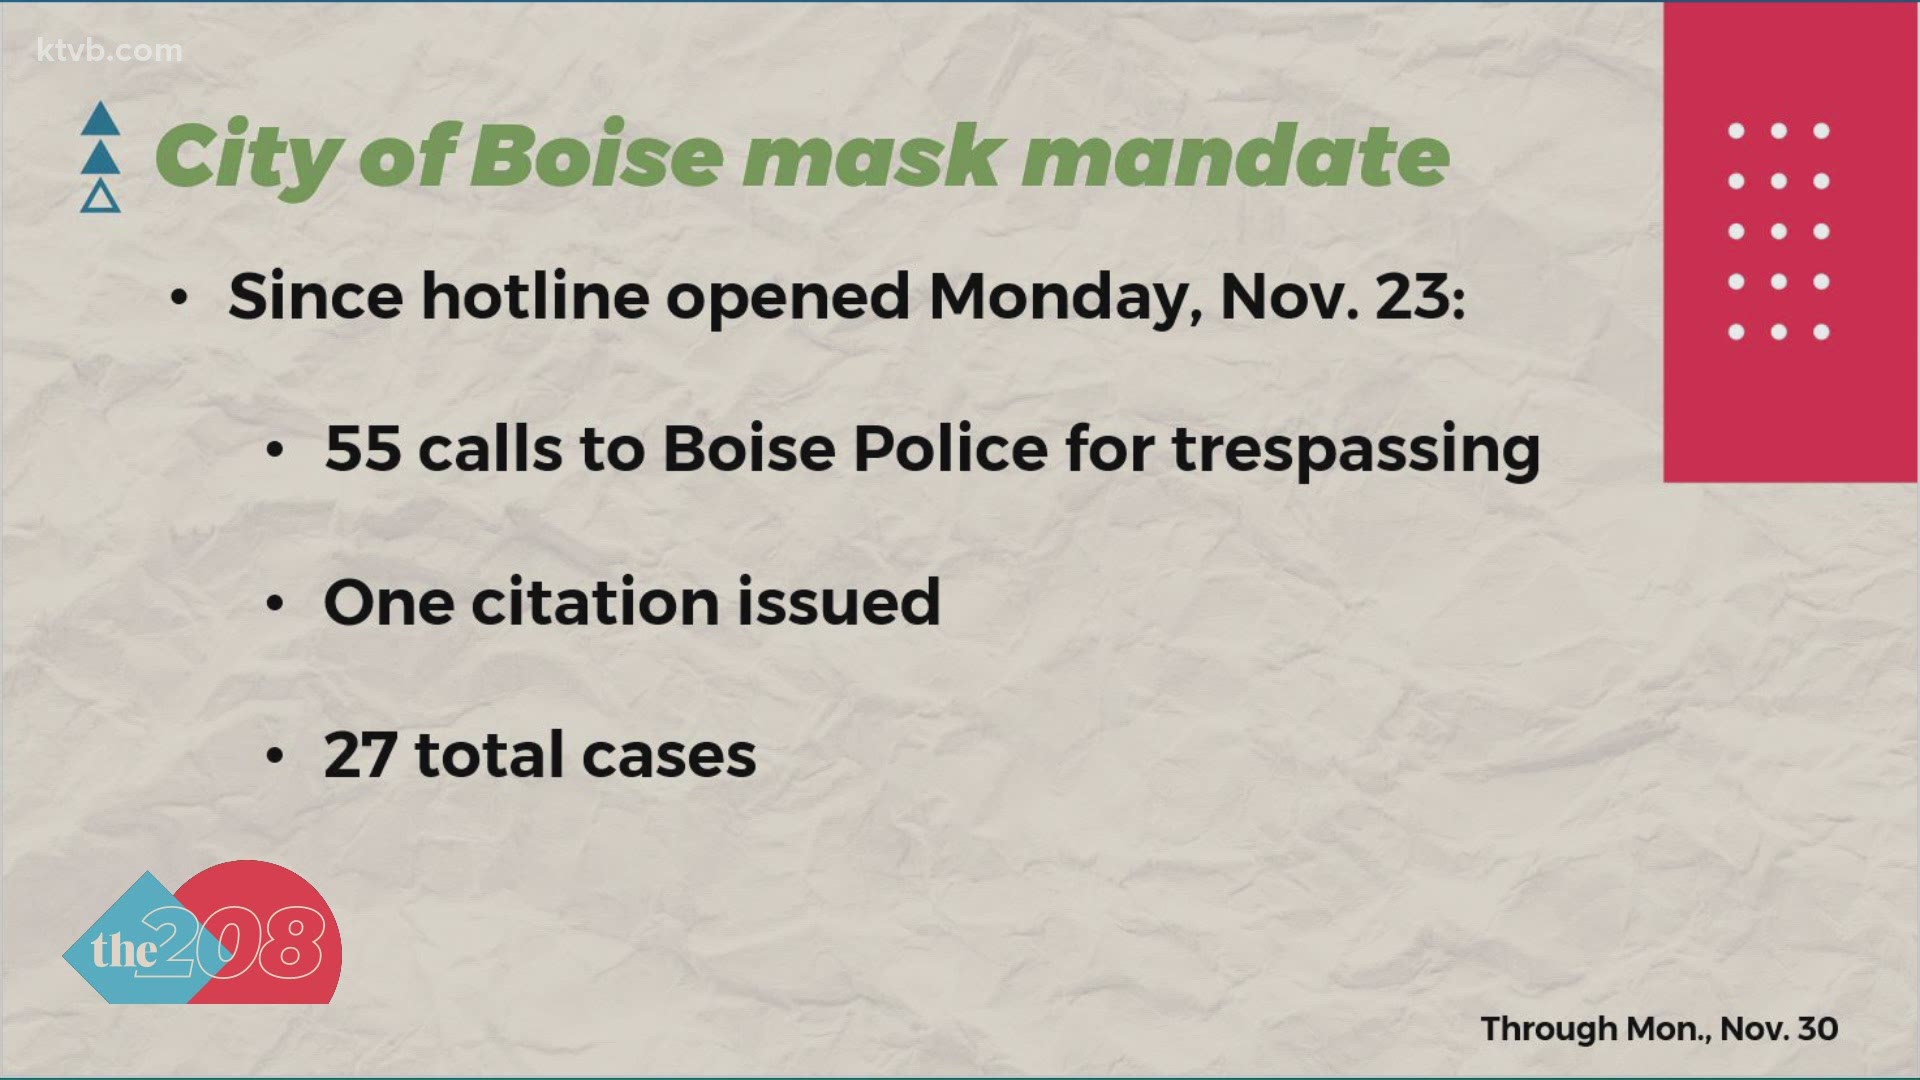 According to Boise Police, there have 55 calls to the city's hotline since it went operational a week ago.